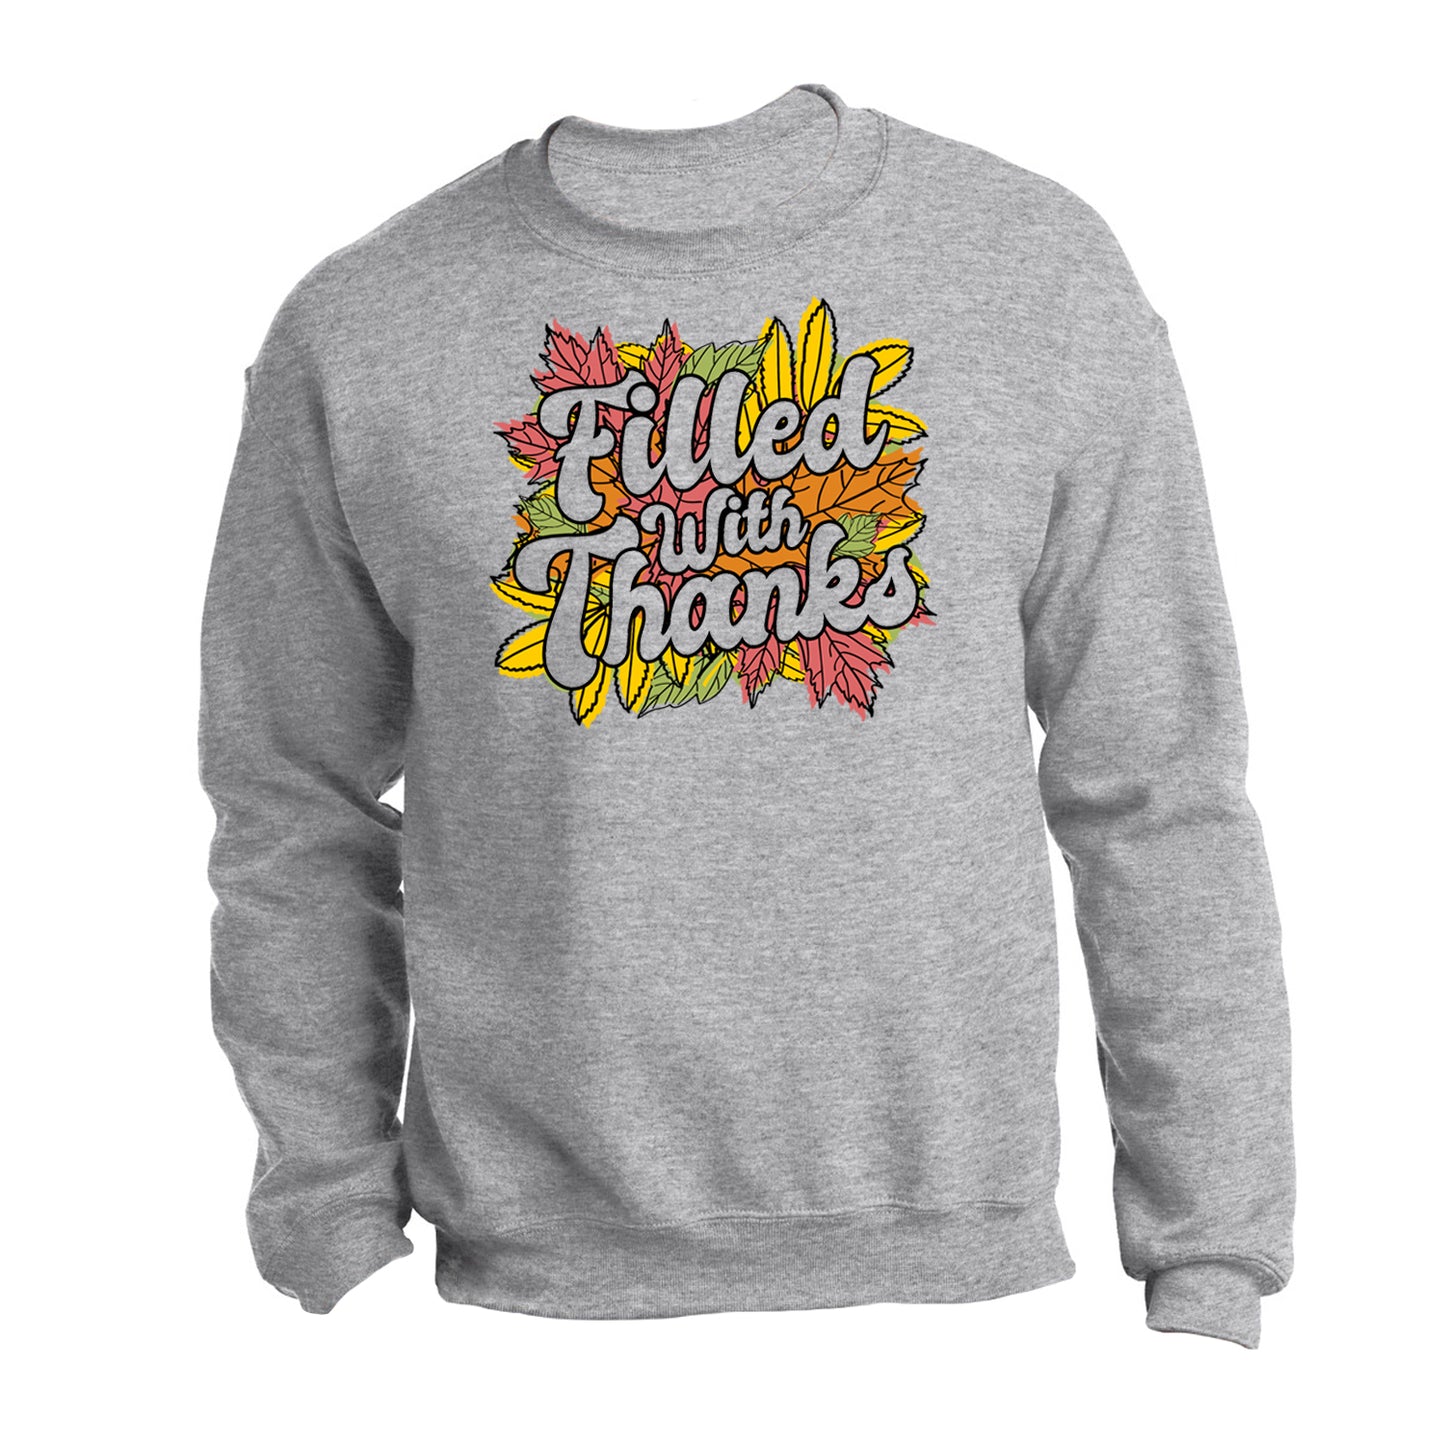 "Filled With Thanks" - Sweatshirt